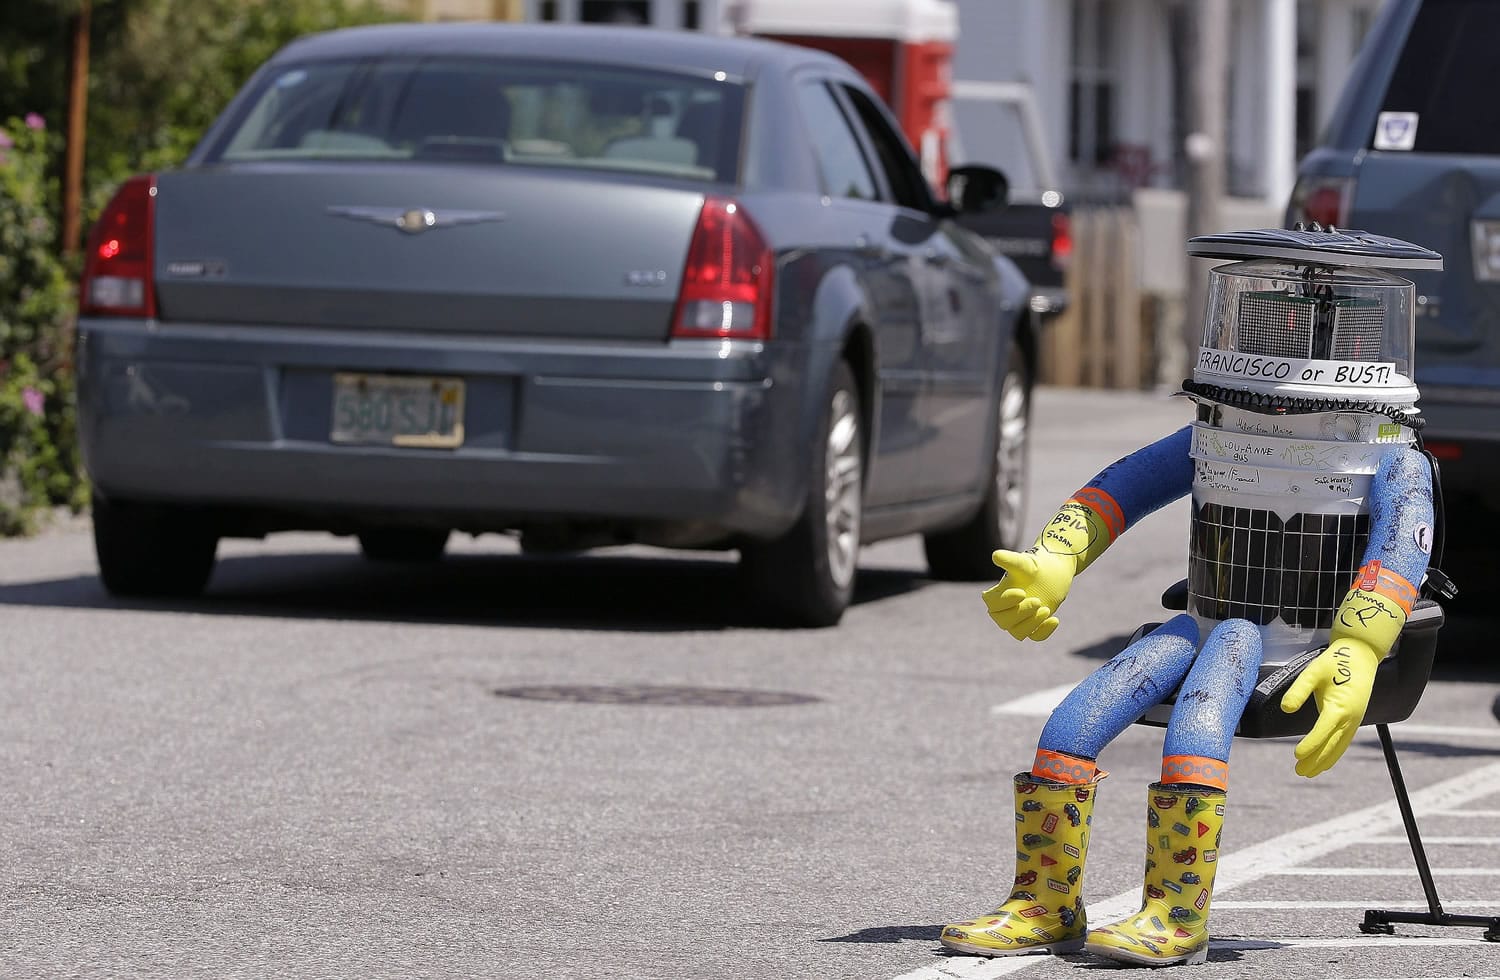 A car drives by HitchBOT, a hitchhiking robot in Marblehead, Mass.